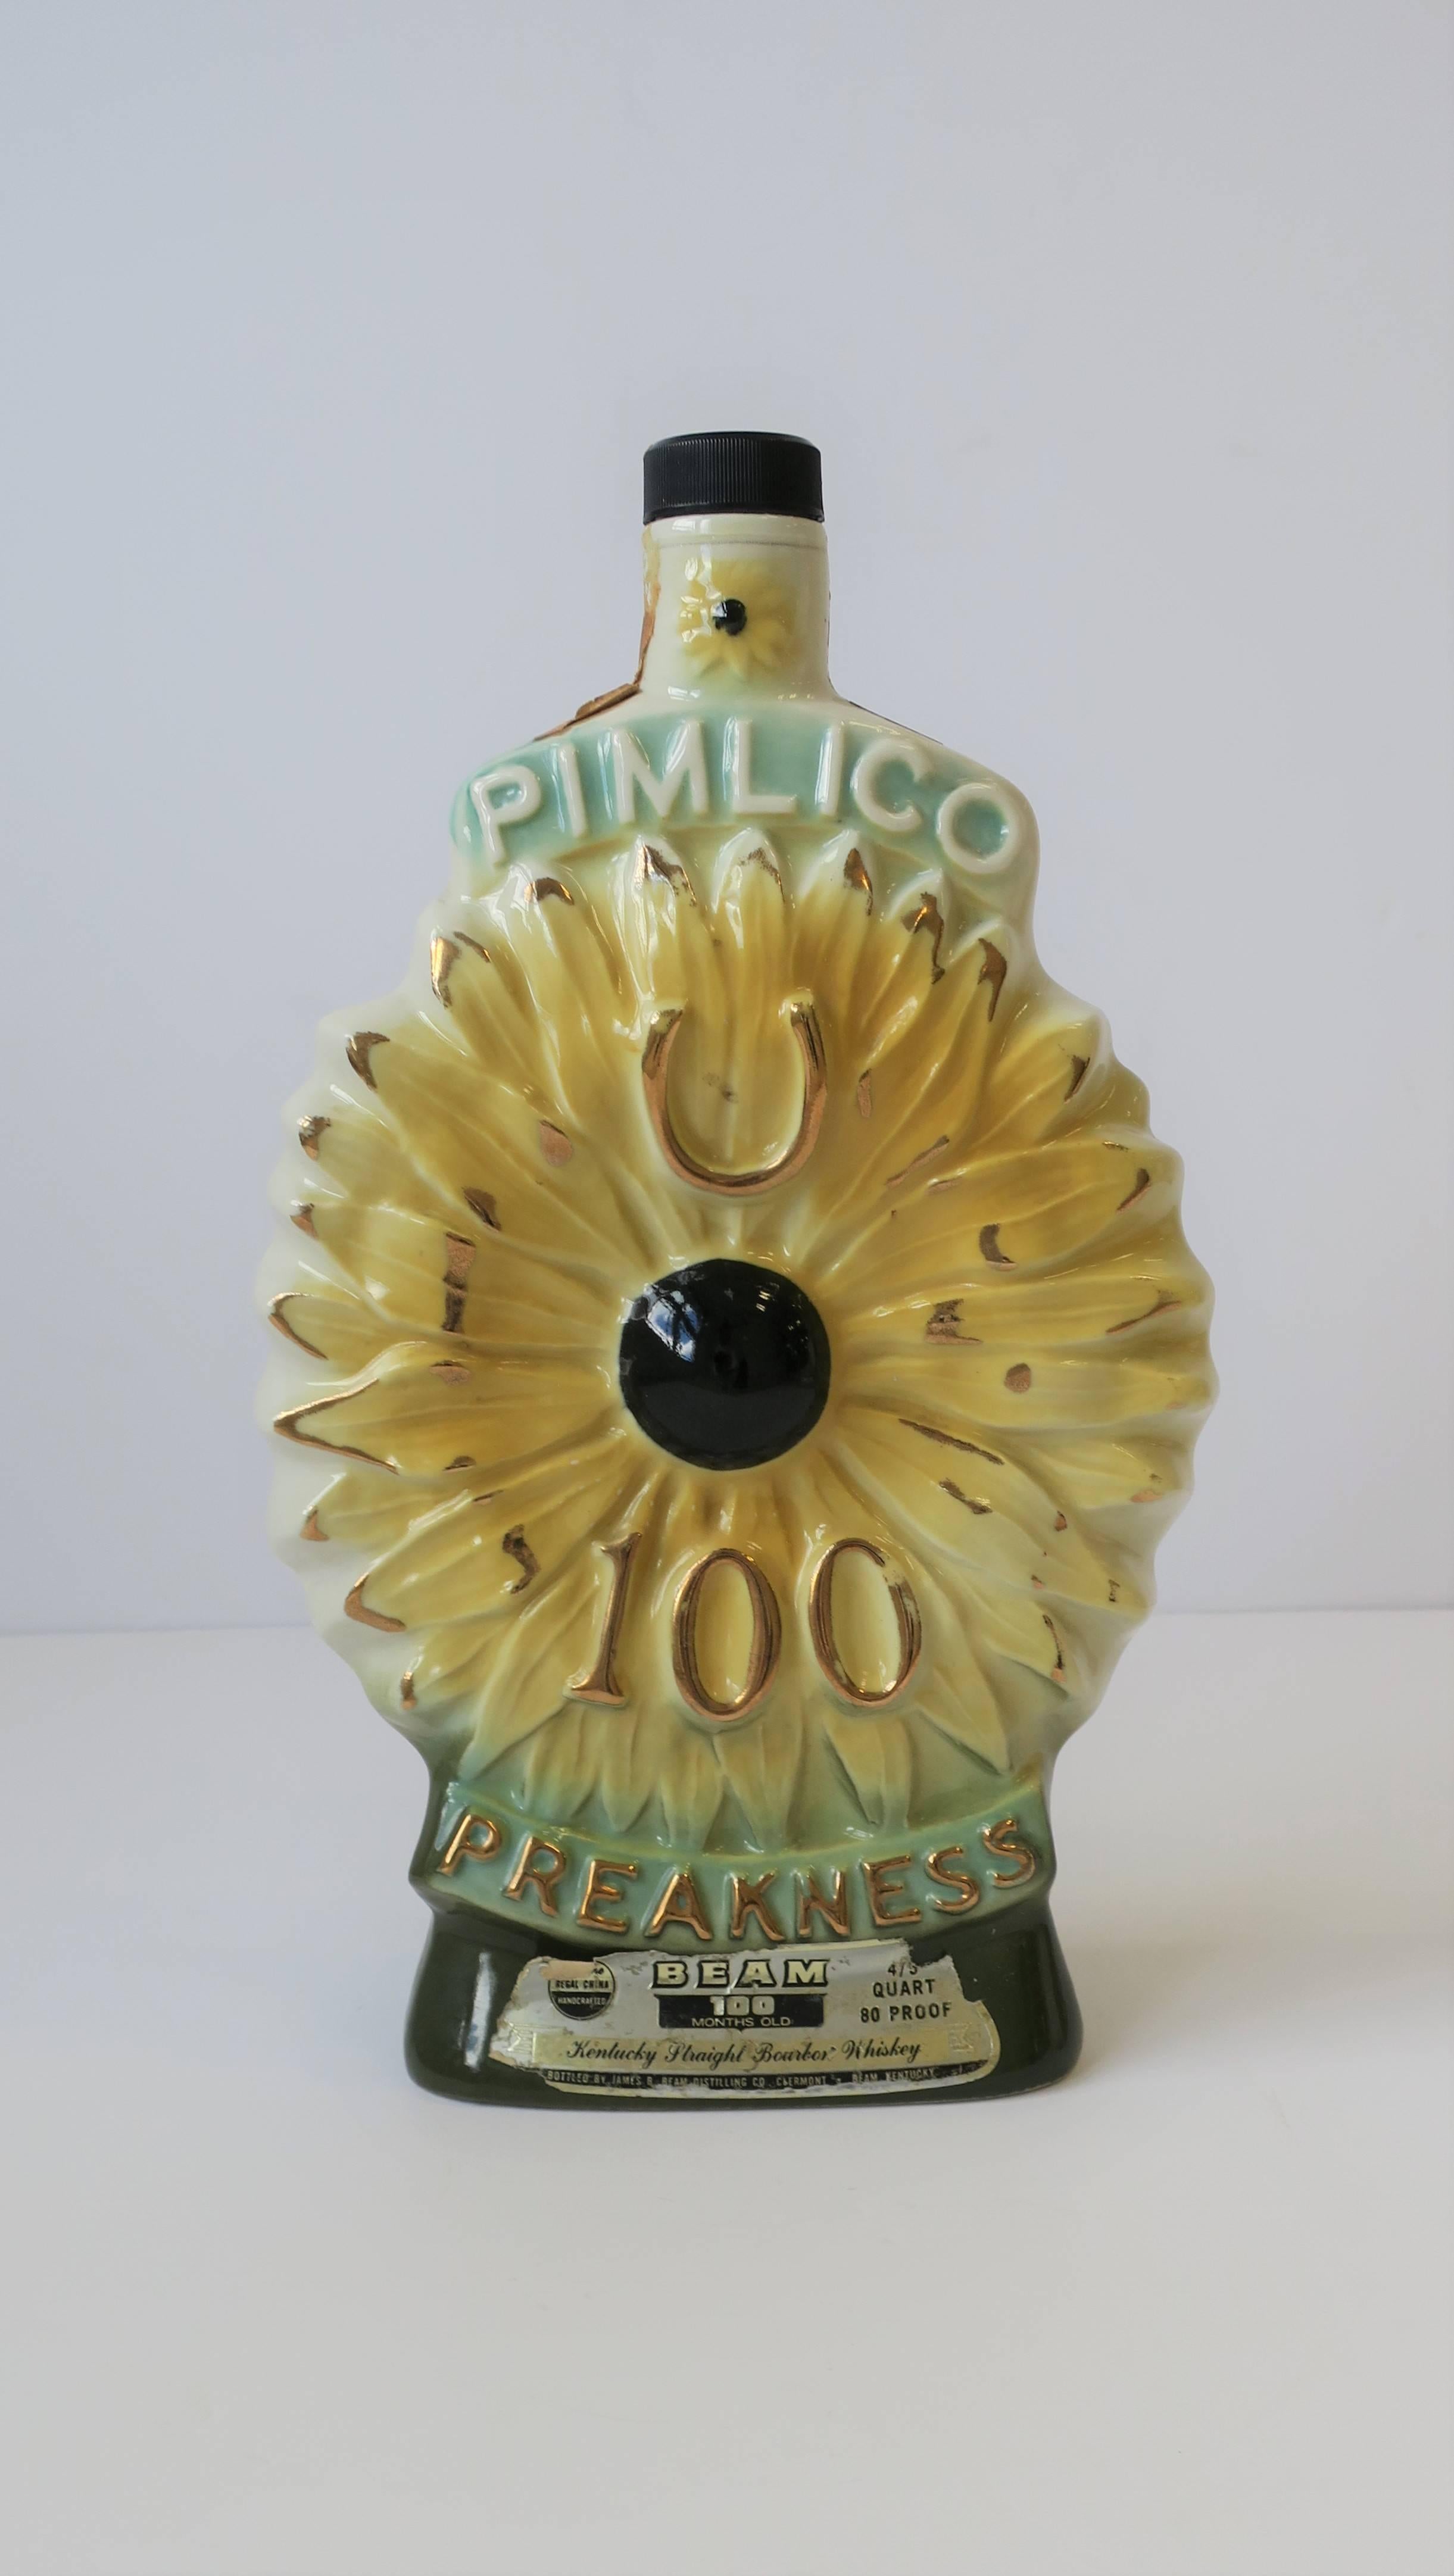 A vintage 100th Anniversary Preakness Stakes Kentucky Derby decanter liquor or spirits bottle by James B. Beam Distilling Co., circa 1975. Bottle commemorates the 100th Anniversary of the Preakness Stakes thoroughbred horse race at Pimlico